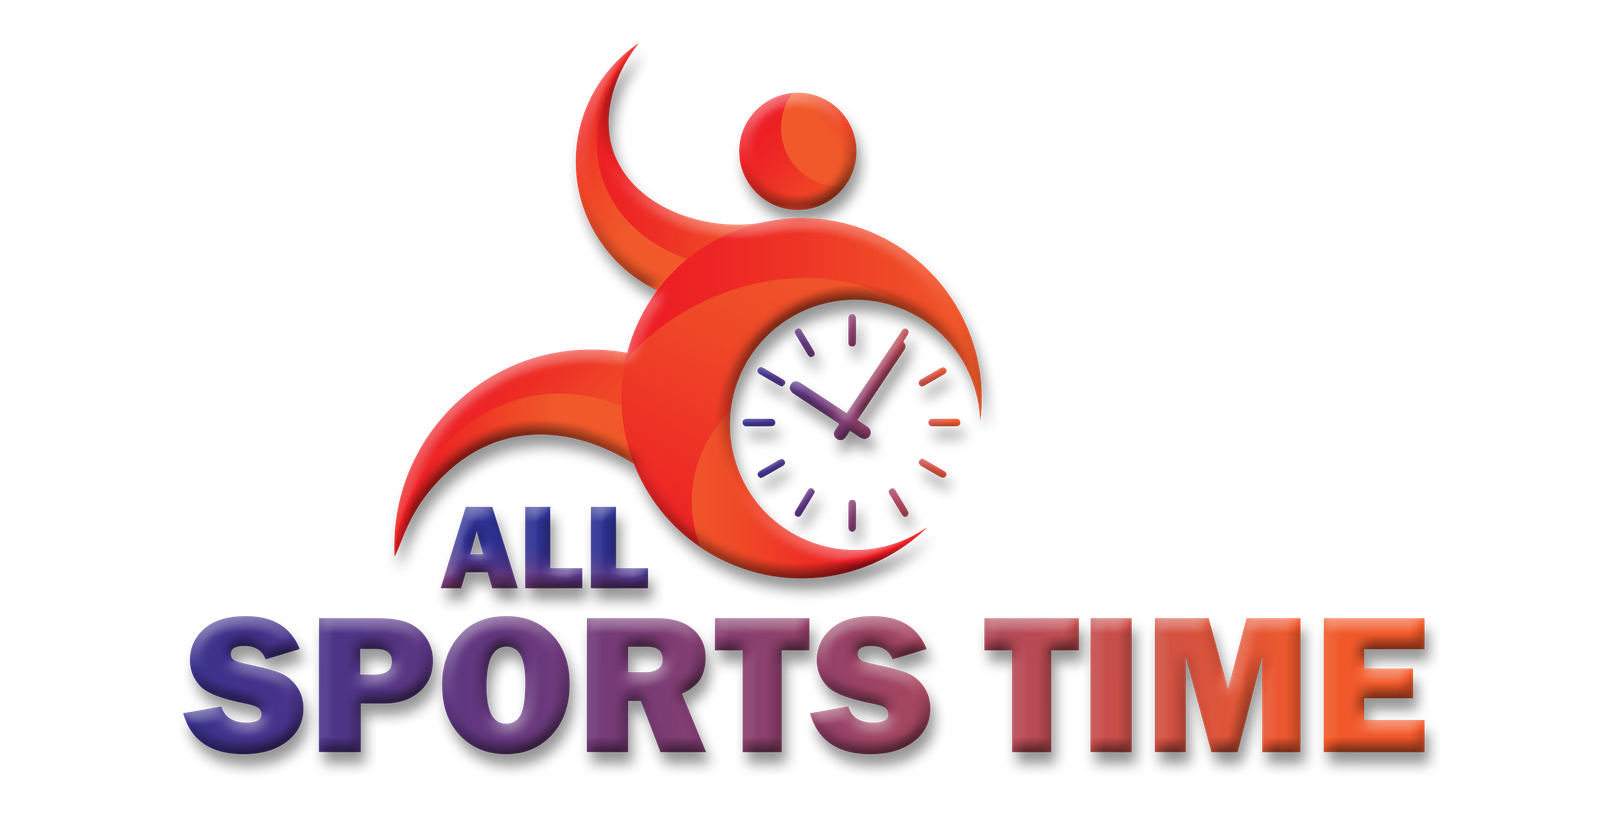 All Sports Time